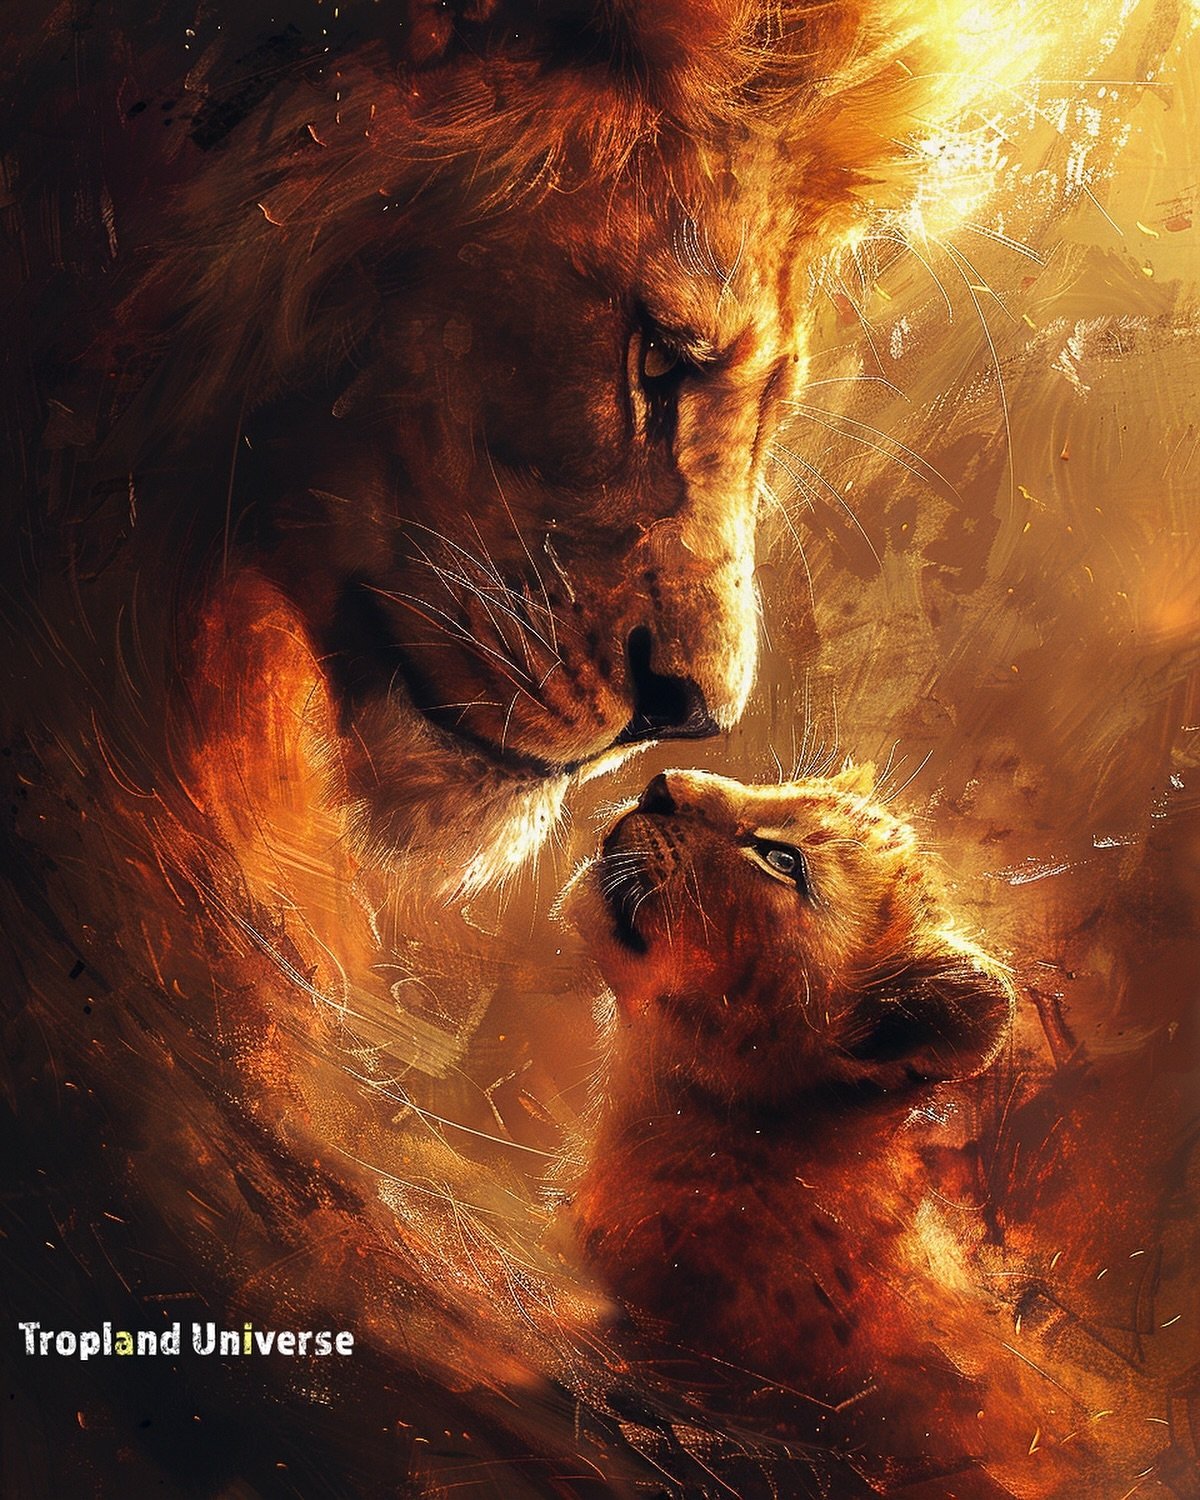 A child is not a vase to be filled, but a fire to be lit.🦁❤️ Reminds me of Mufasa and Simba from the Lion King, right!? 

🦁 Follow me @troplanduniverse for a journey beyond the ordinary. 

If you&rsquo;d like to repost any of my lions or animals 👉